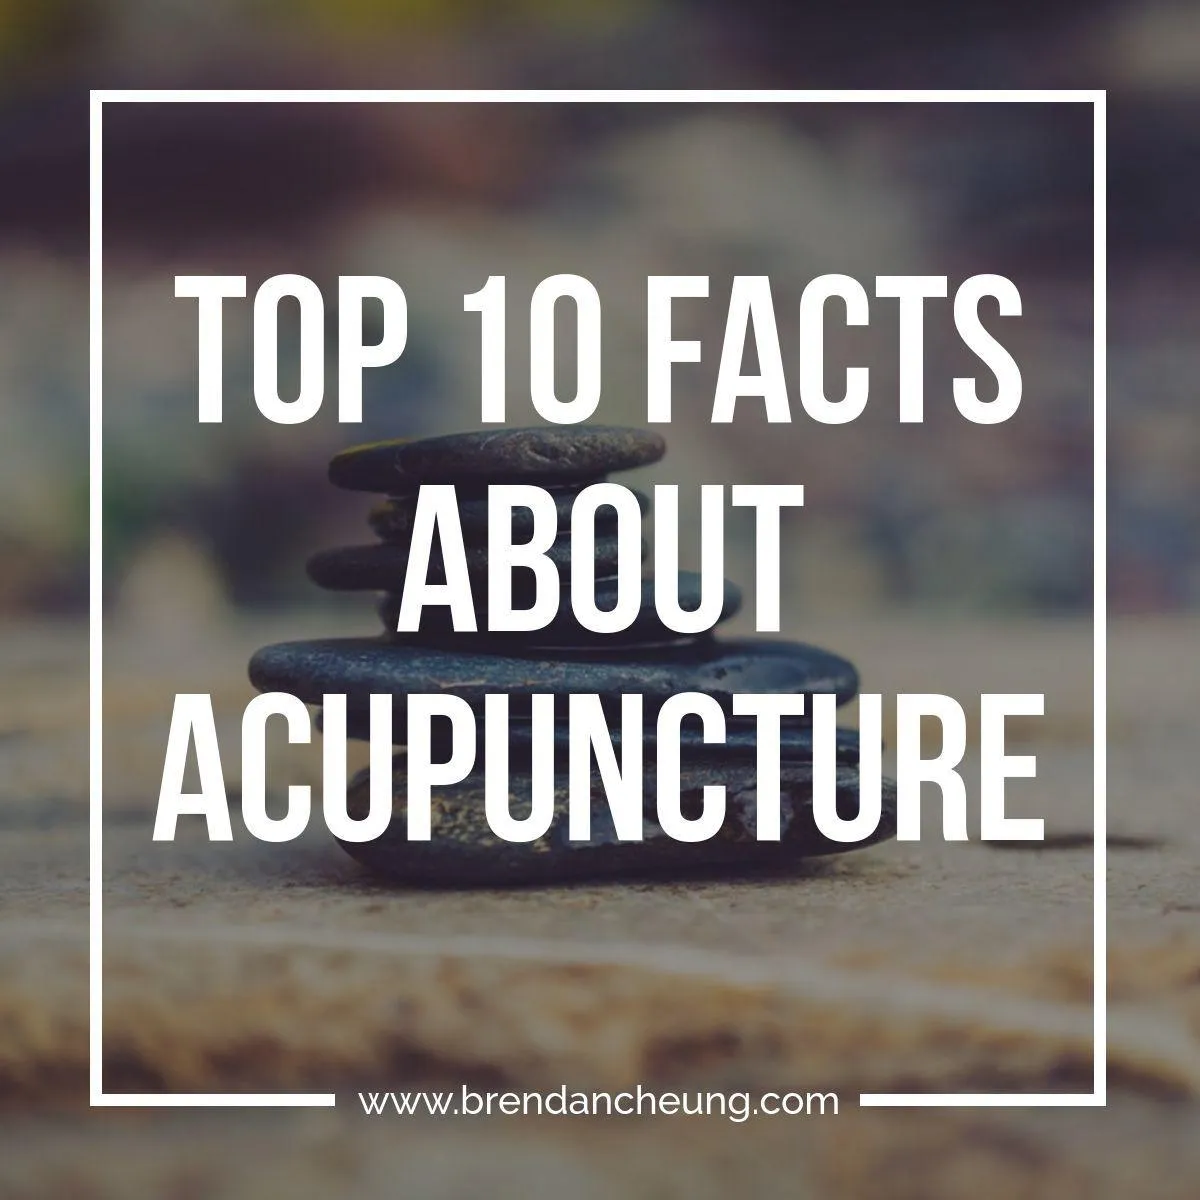 Top 10 Facts About Acupuncture